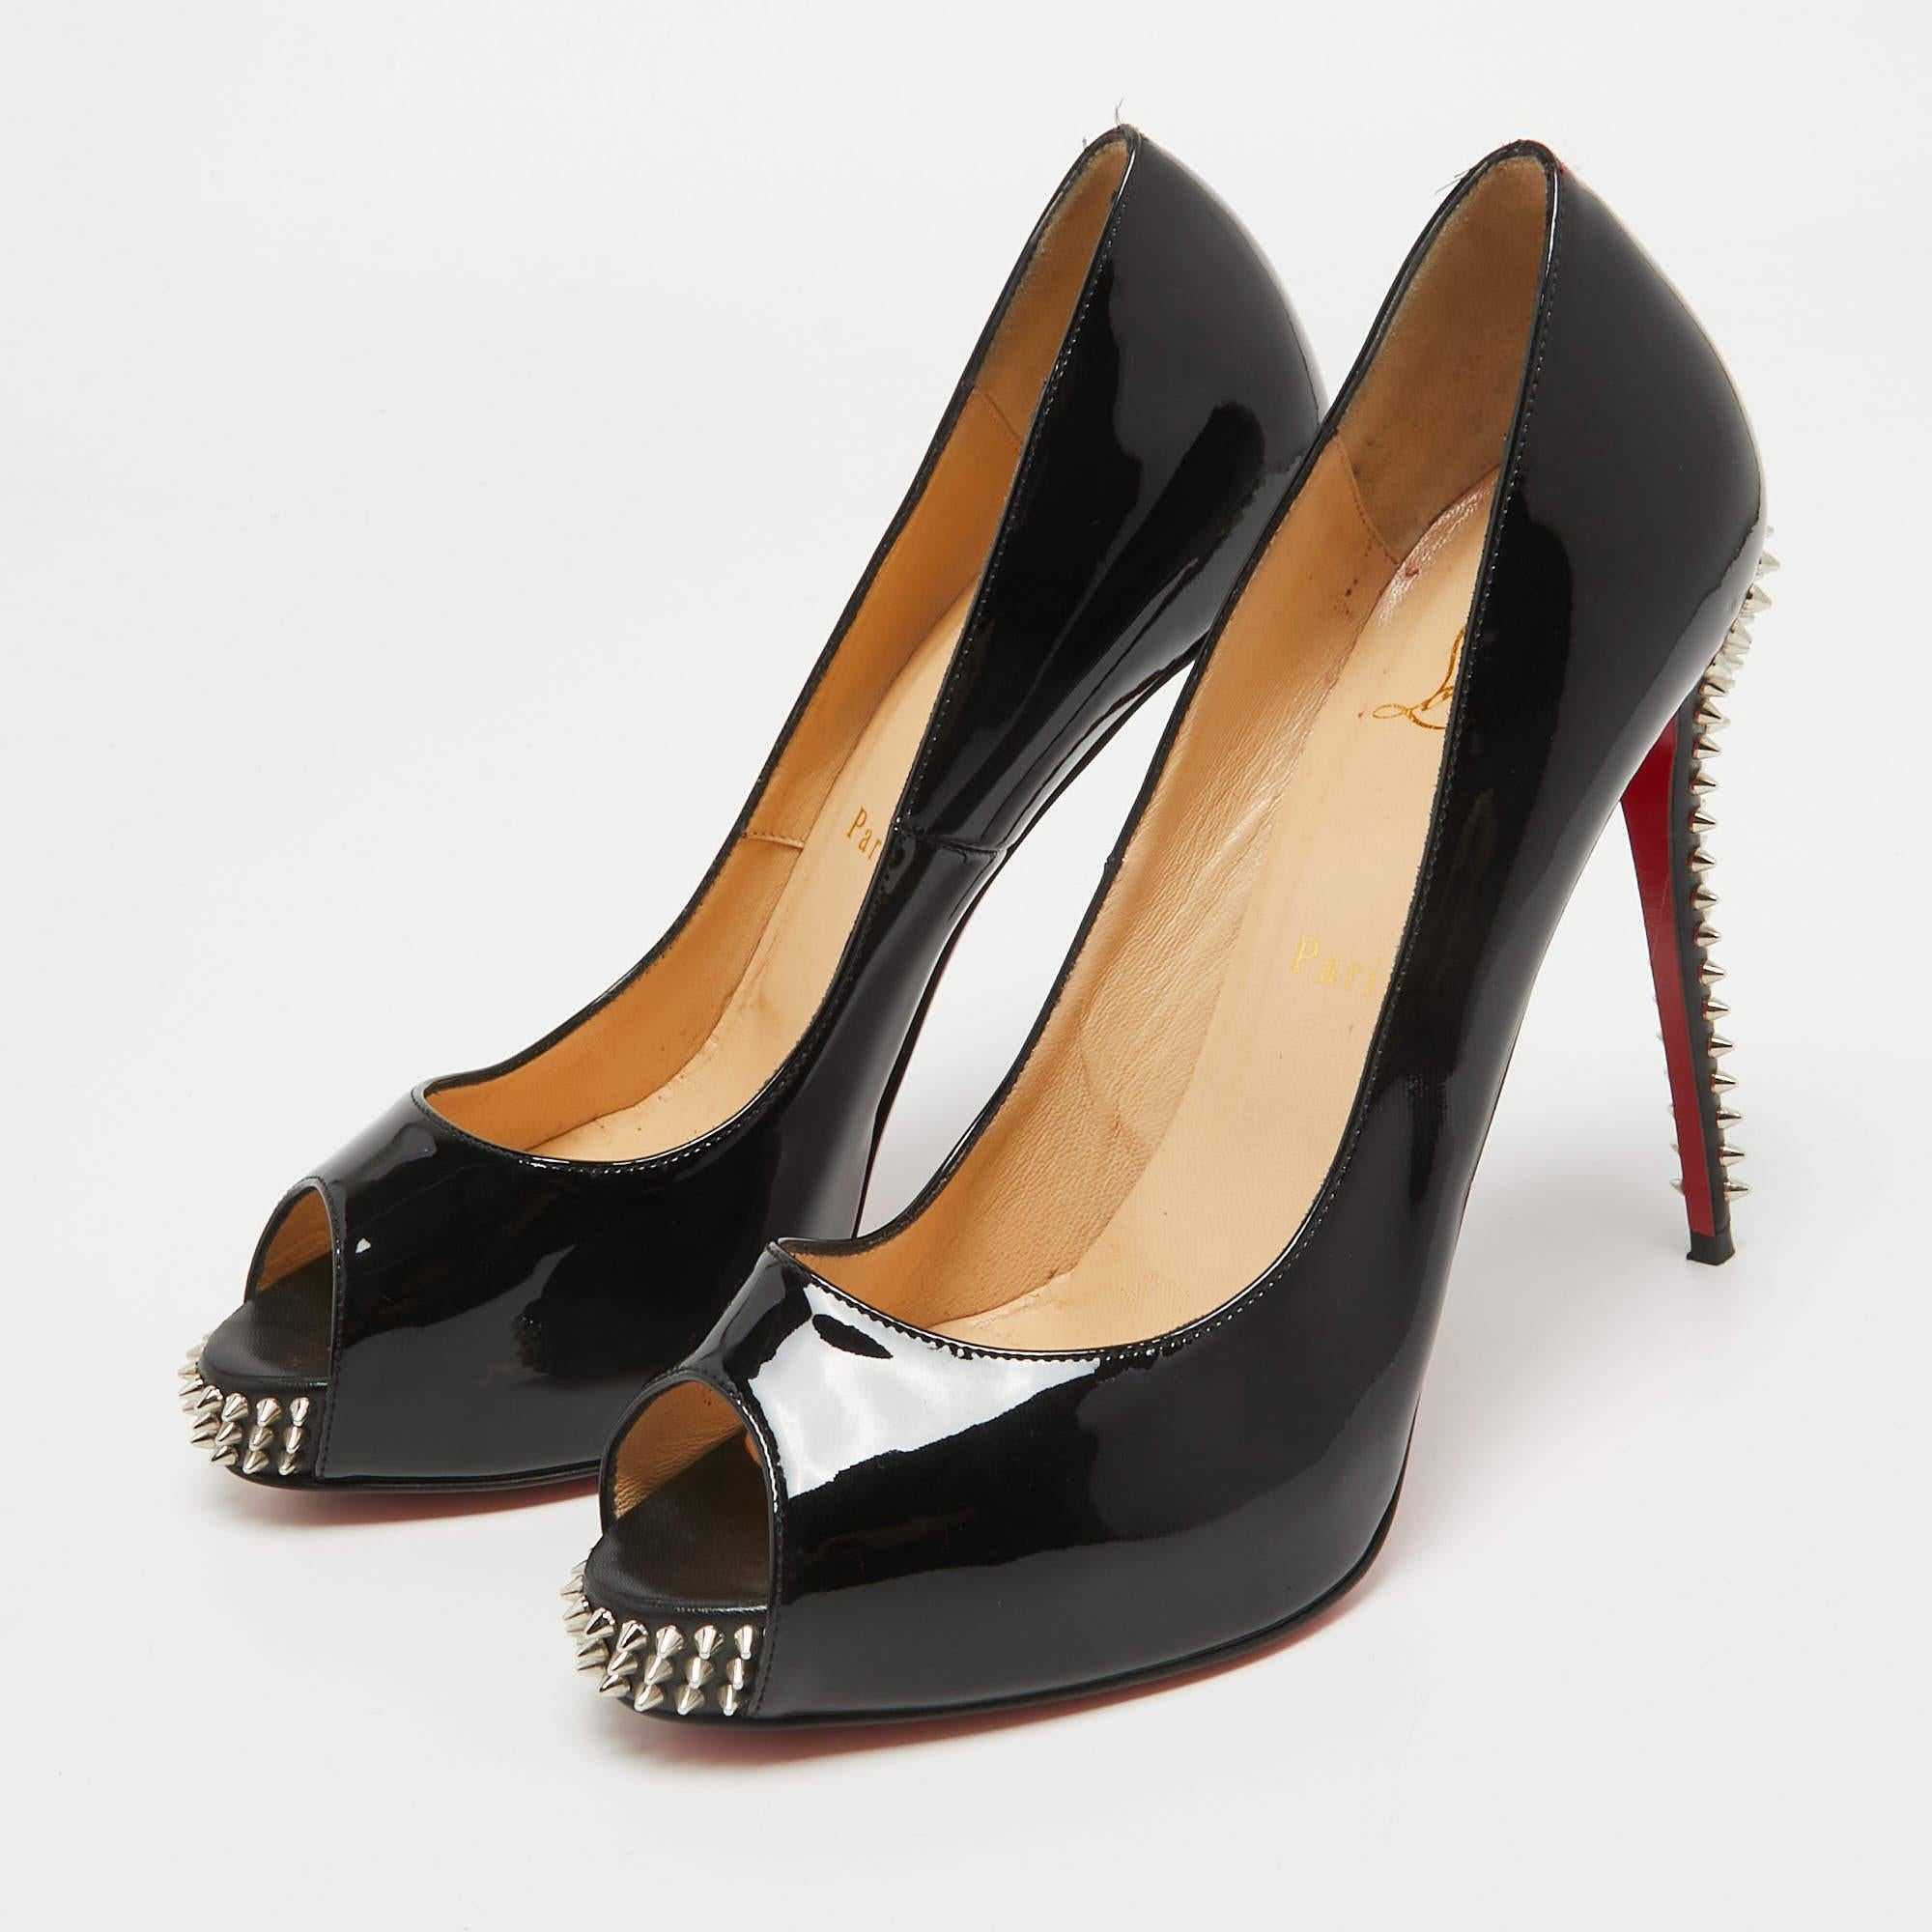 Christian Louboutin Patent Leather Spikes Peep Toe Platform Pumps Size 38.5 For Sale 2